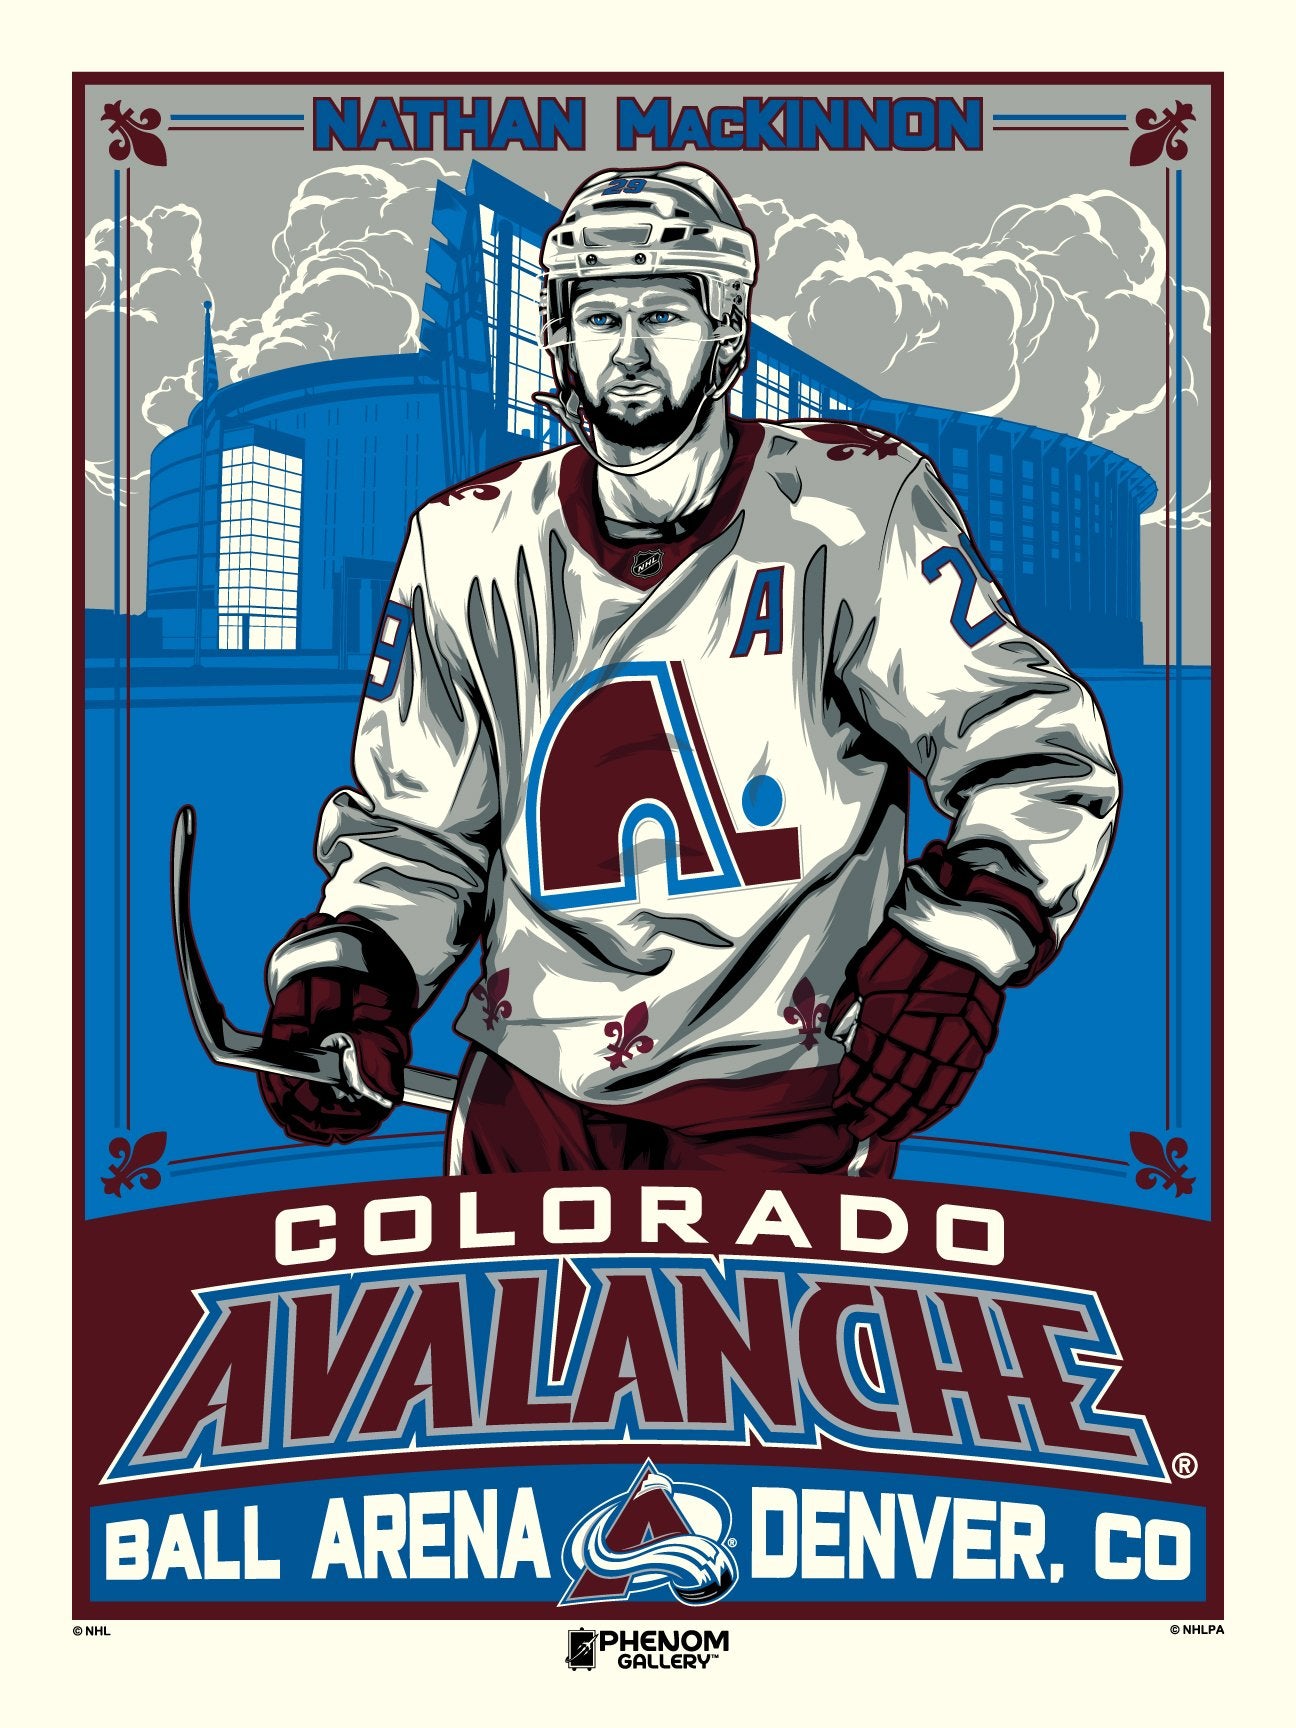 Colorado Avalanche's Ball Arena No. 1 in NHL, study shows - The